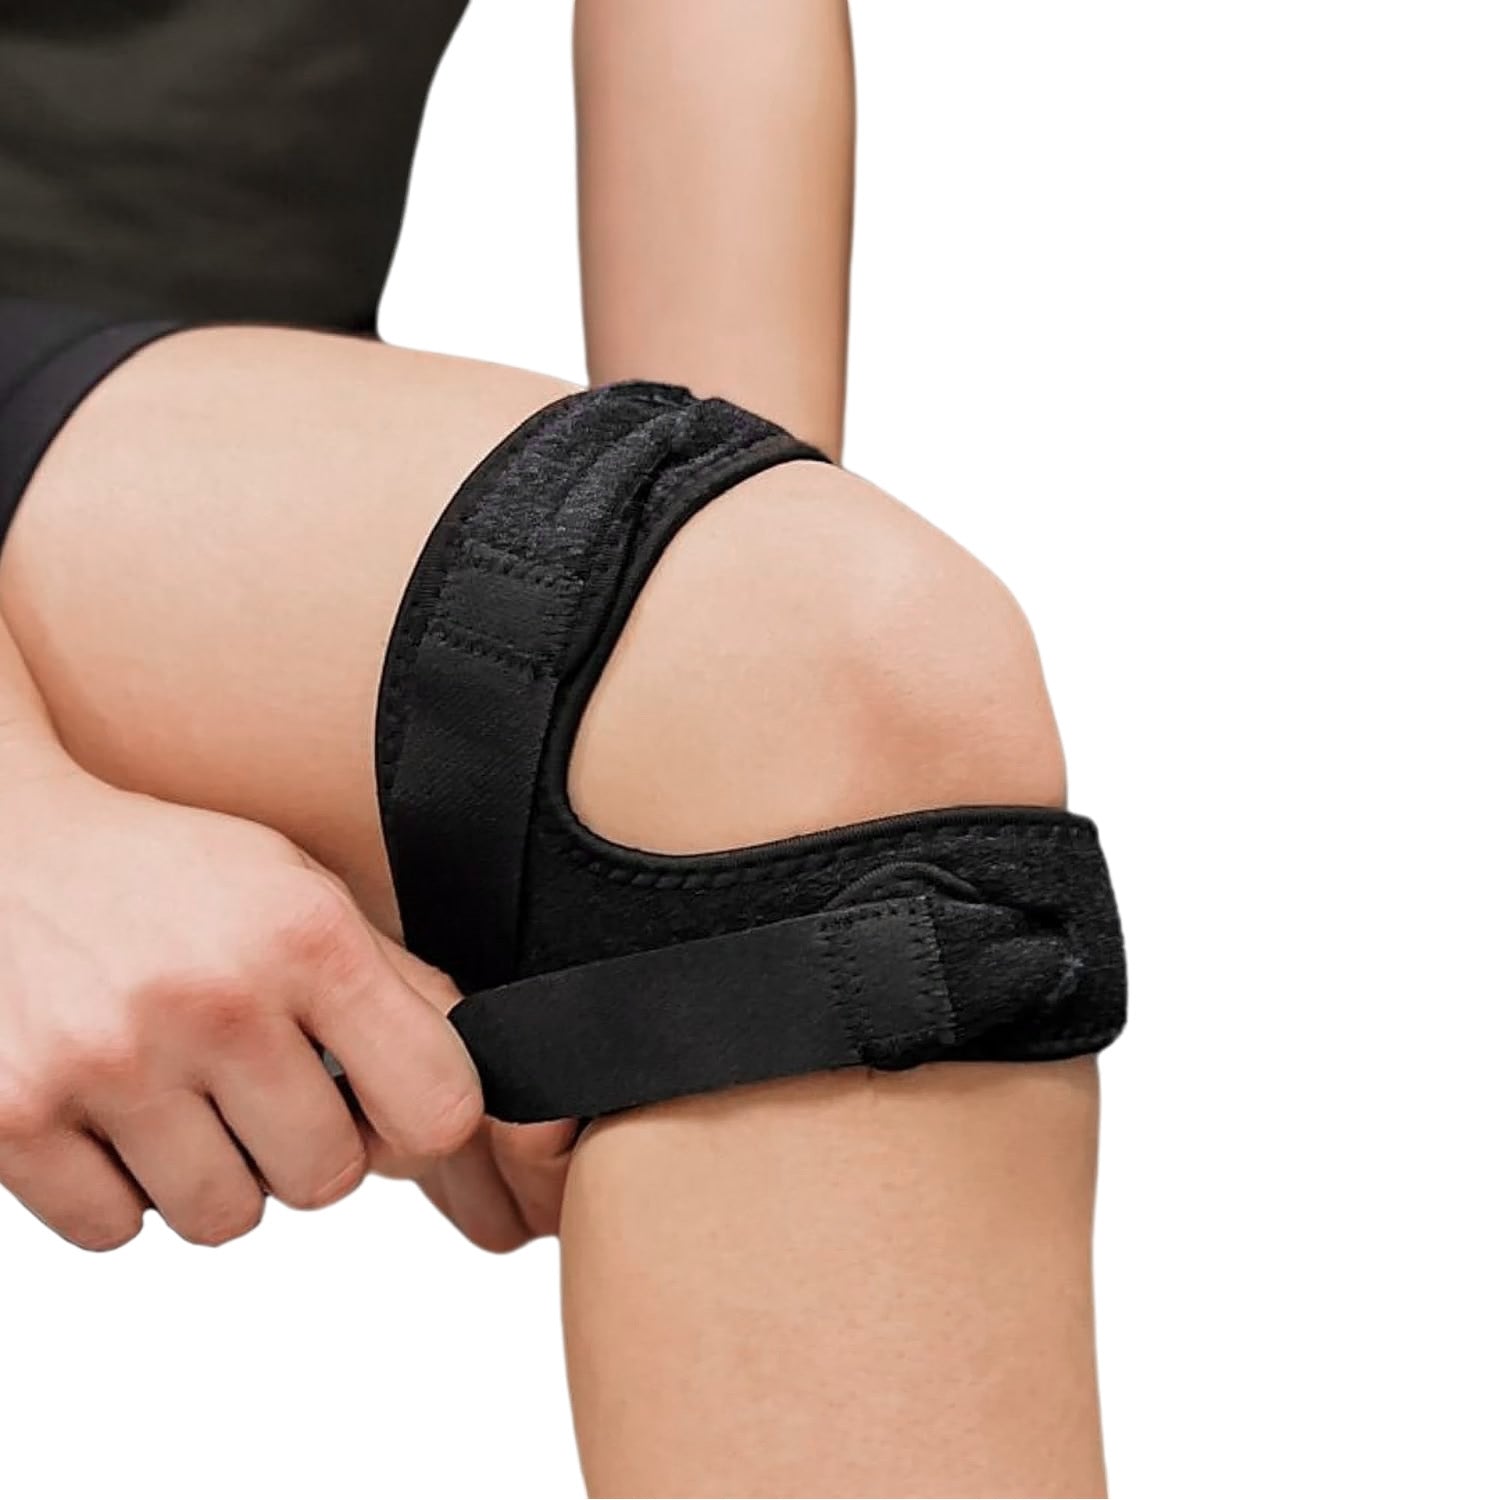 Adjustable Double Patella Knee Strap for Optimal Support and Pain Relief